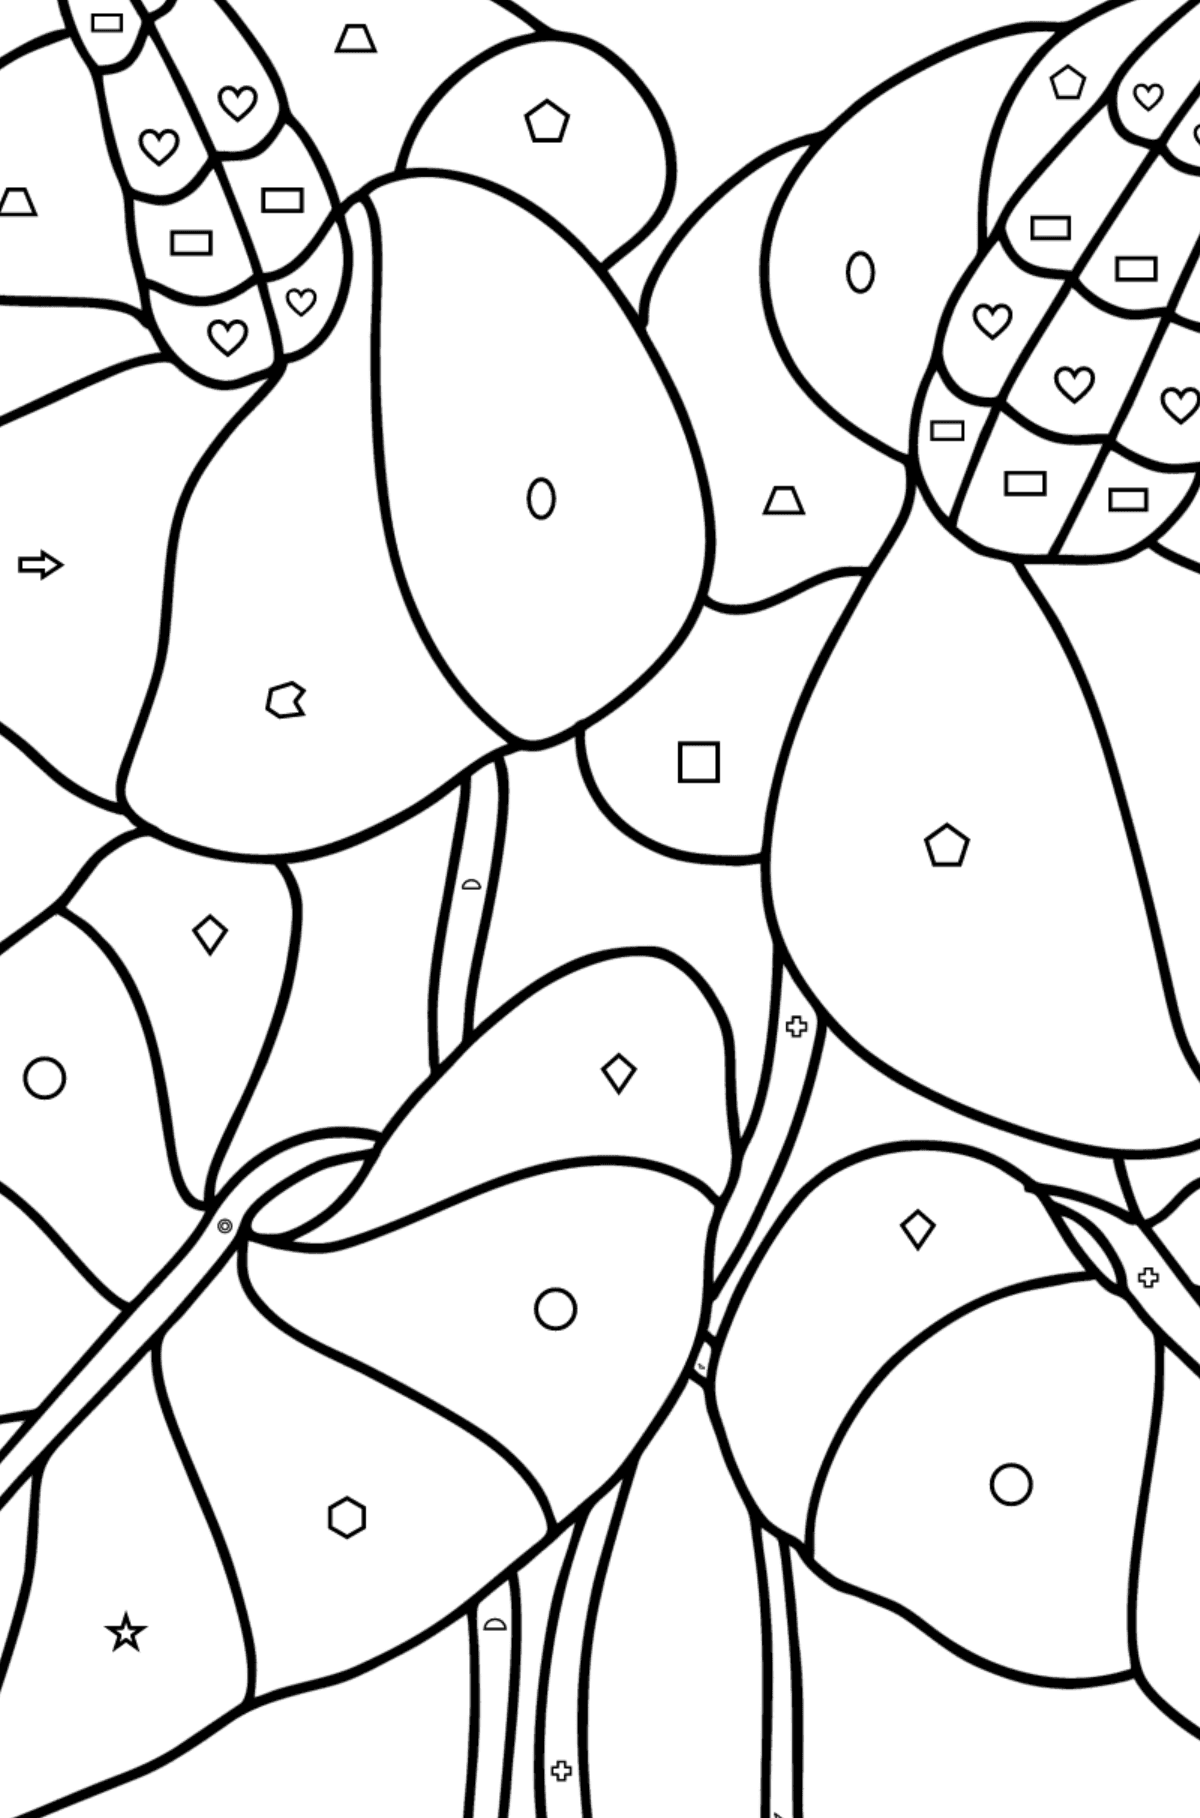 Anthurium coloring page - Coloring by Geometric Shapes for Kids